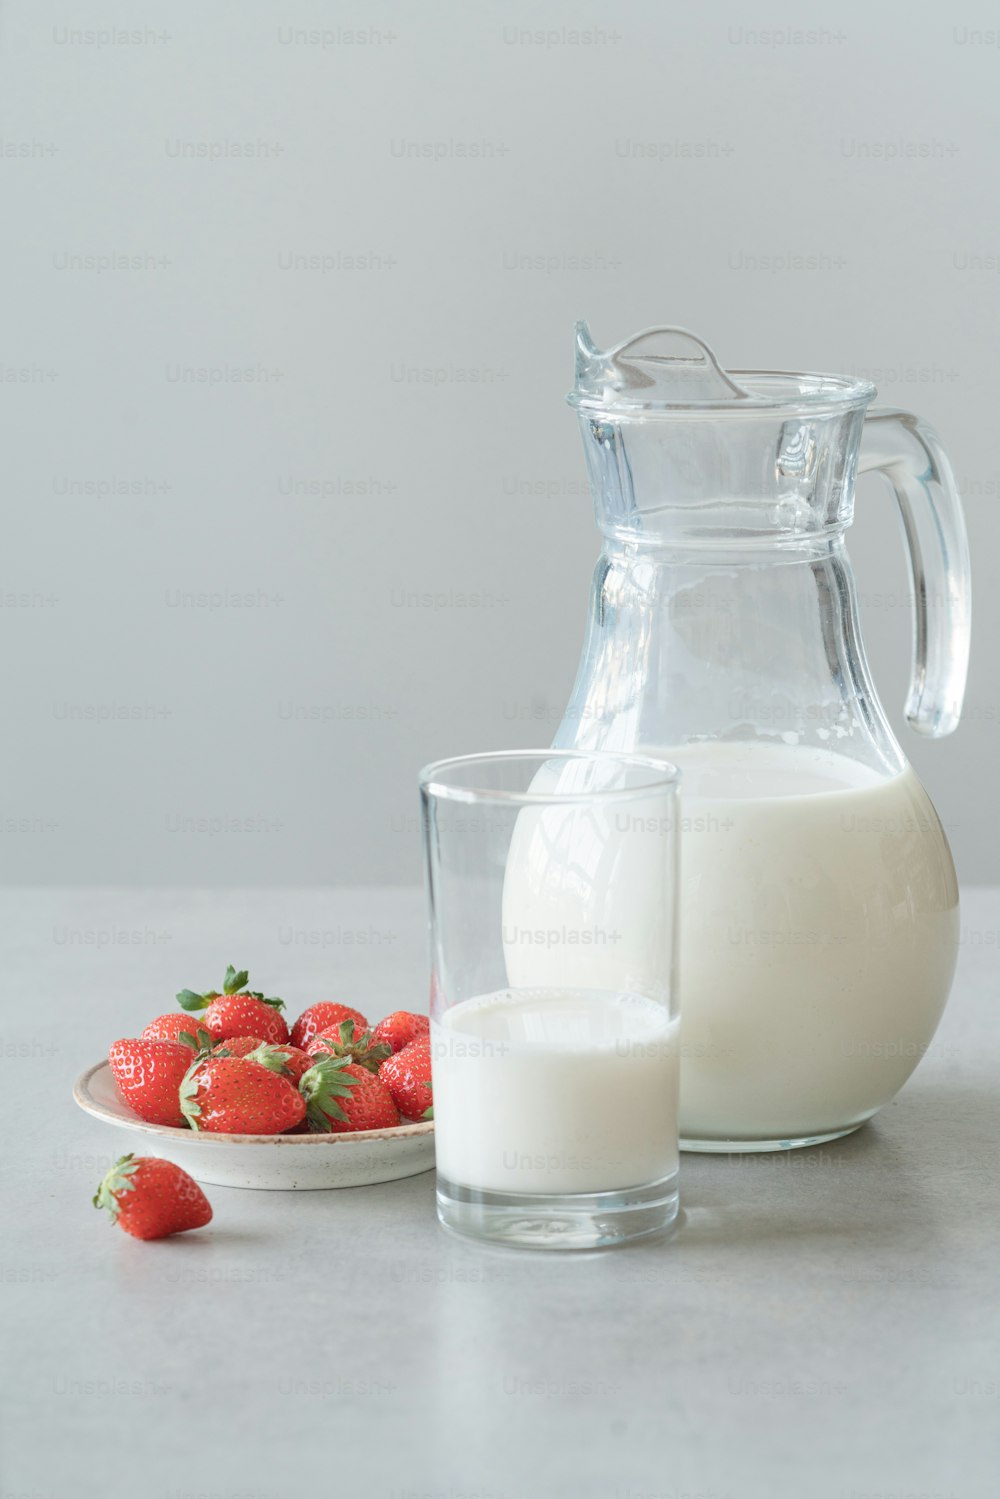 a pitcher of milk next to a plate of strawberries